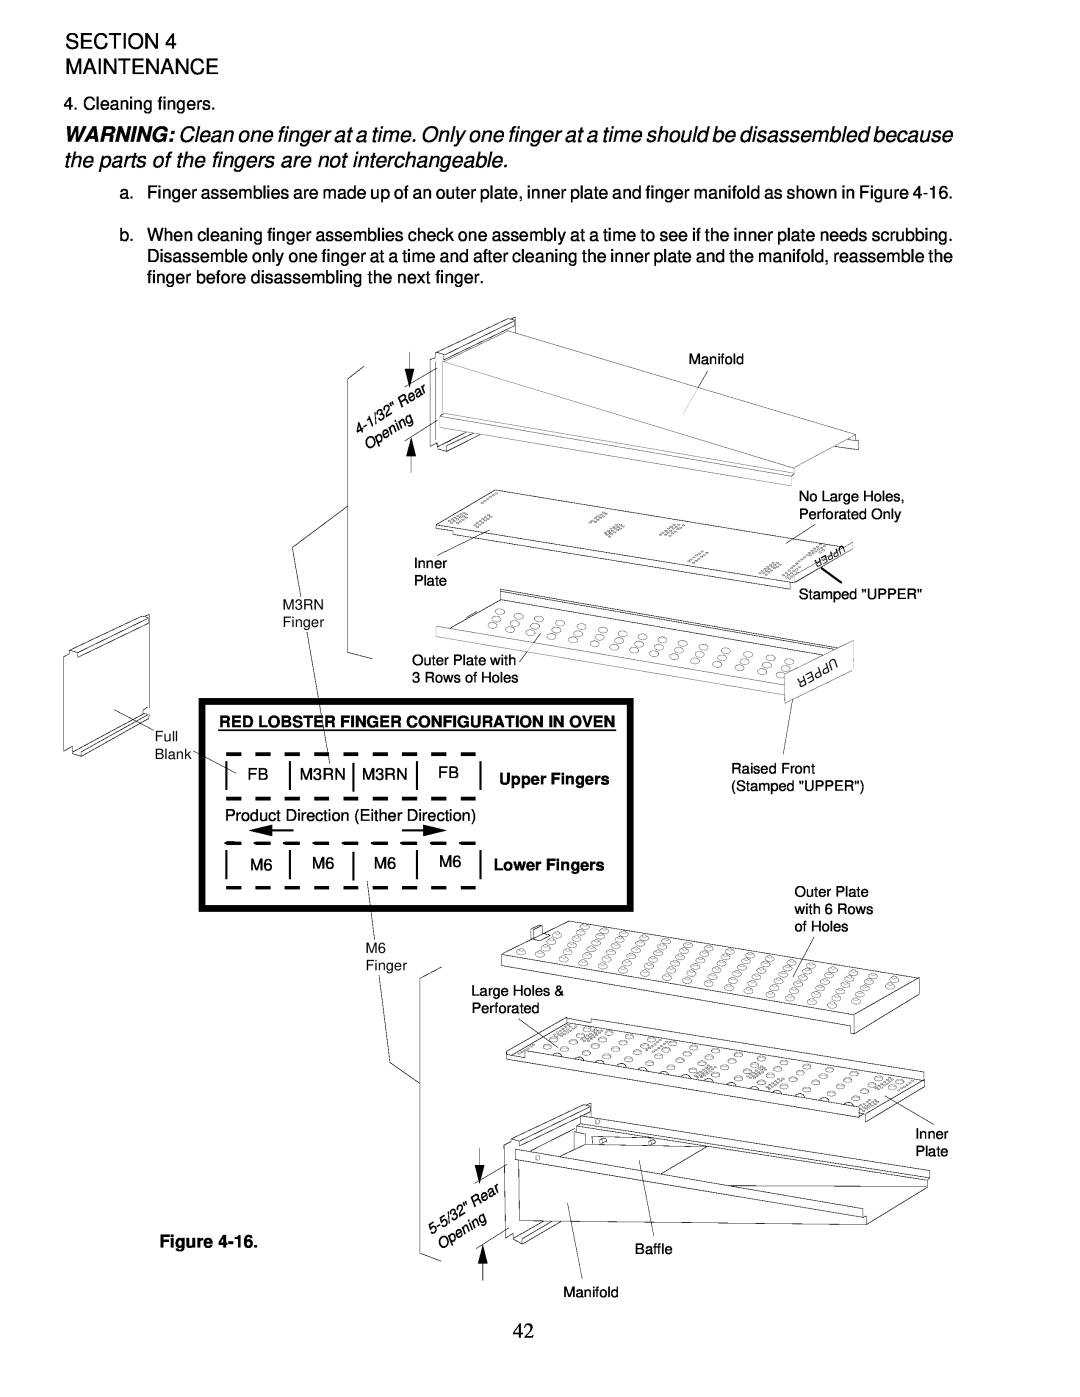 Middleby Marshall PS200-R68 installation manual Section Maintenance, Cleaning fingers, Figure 